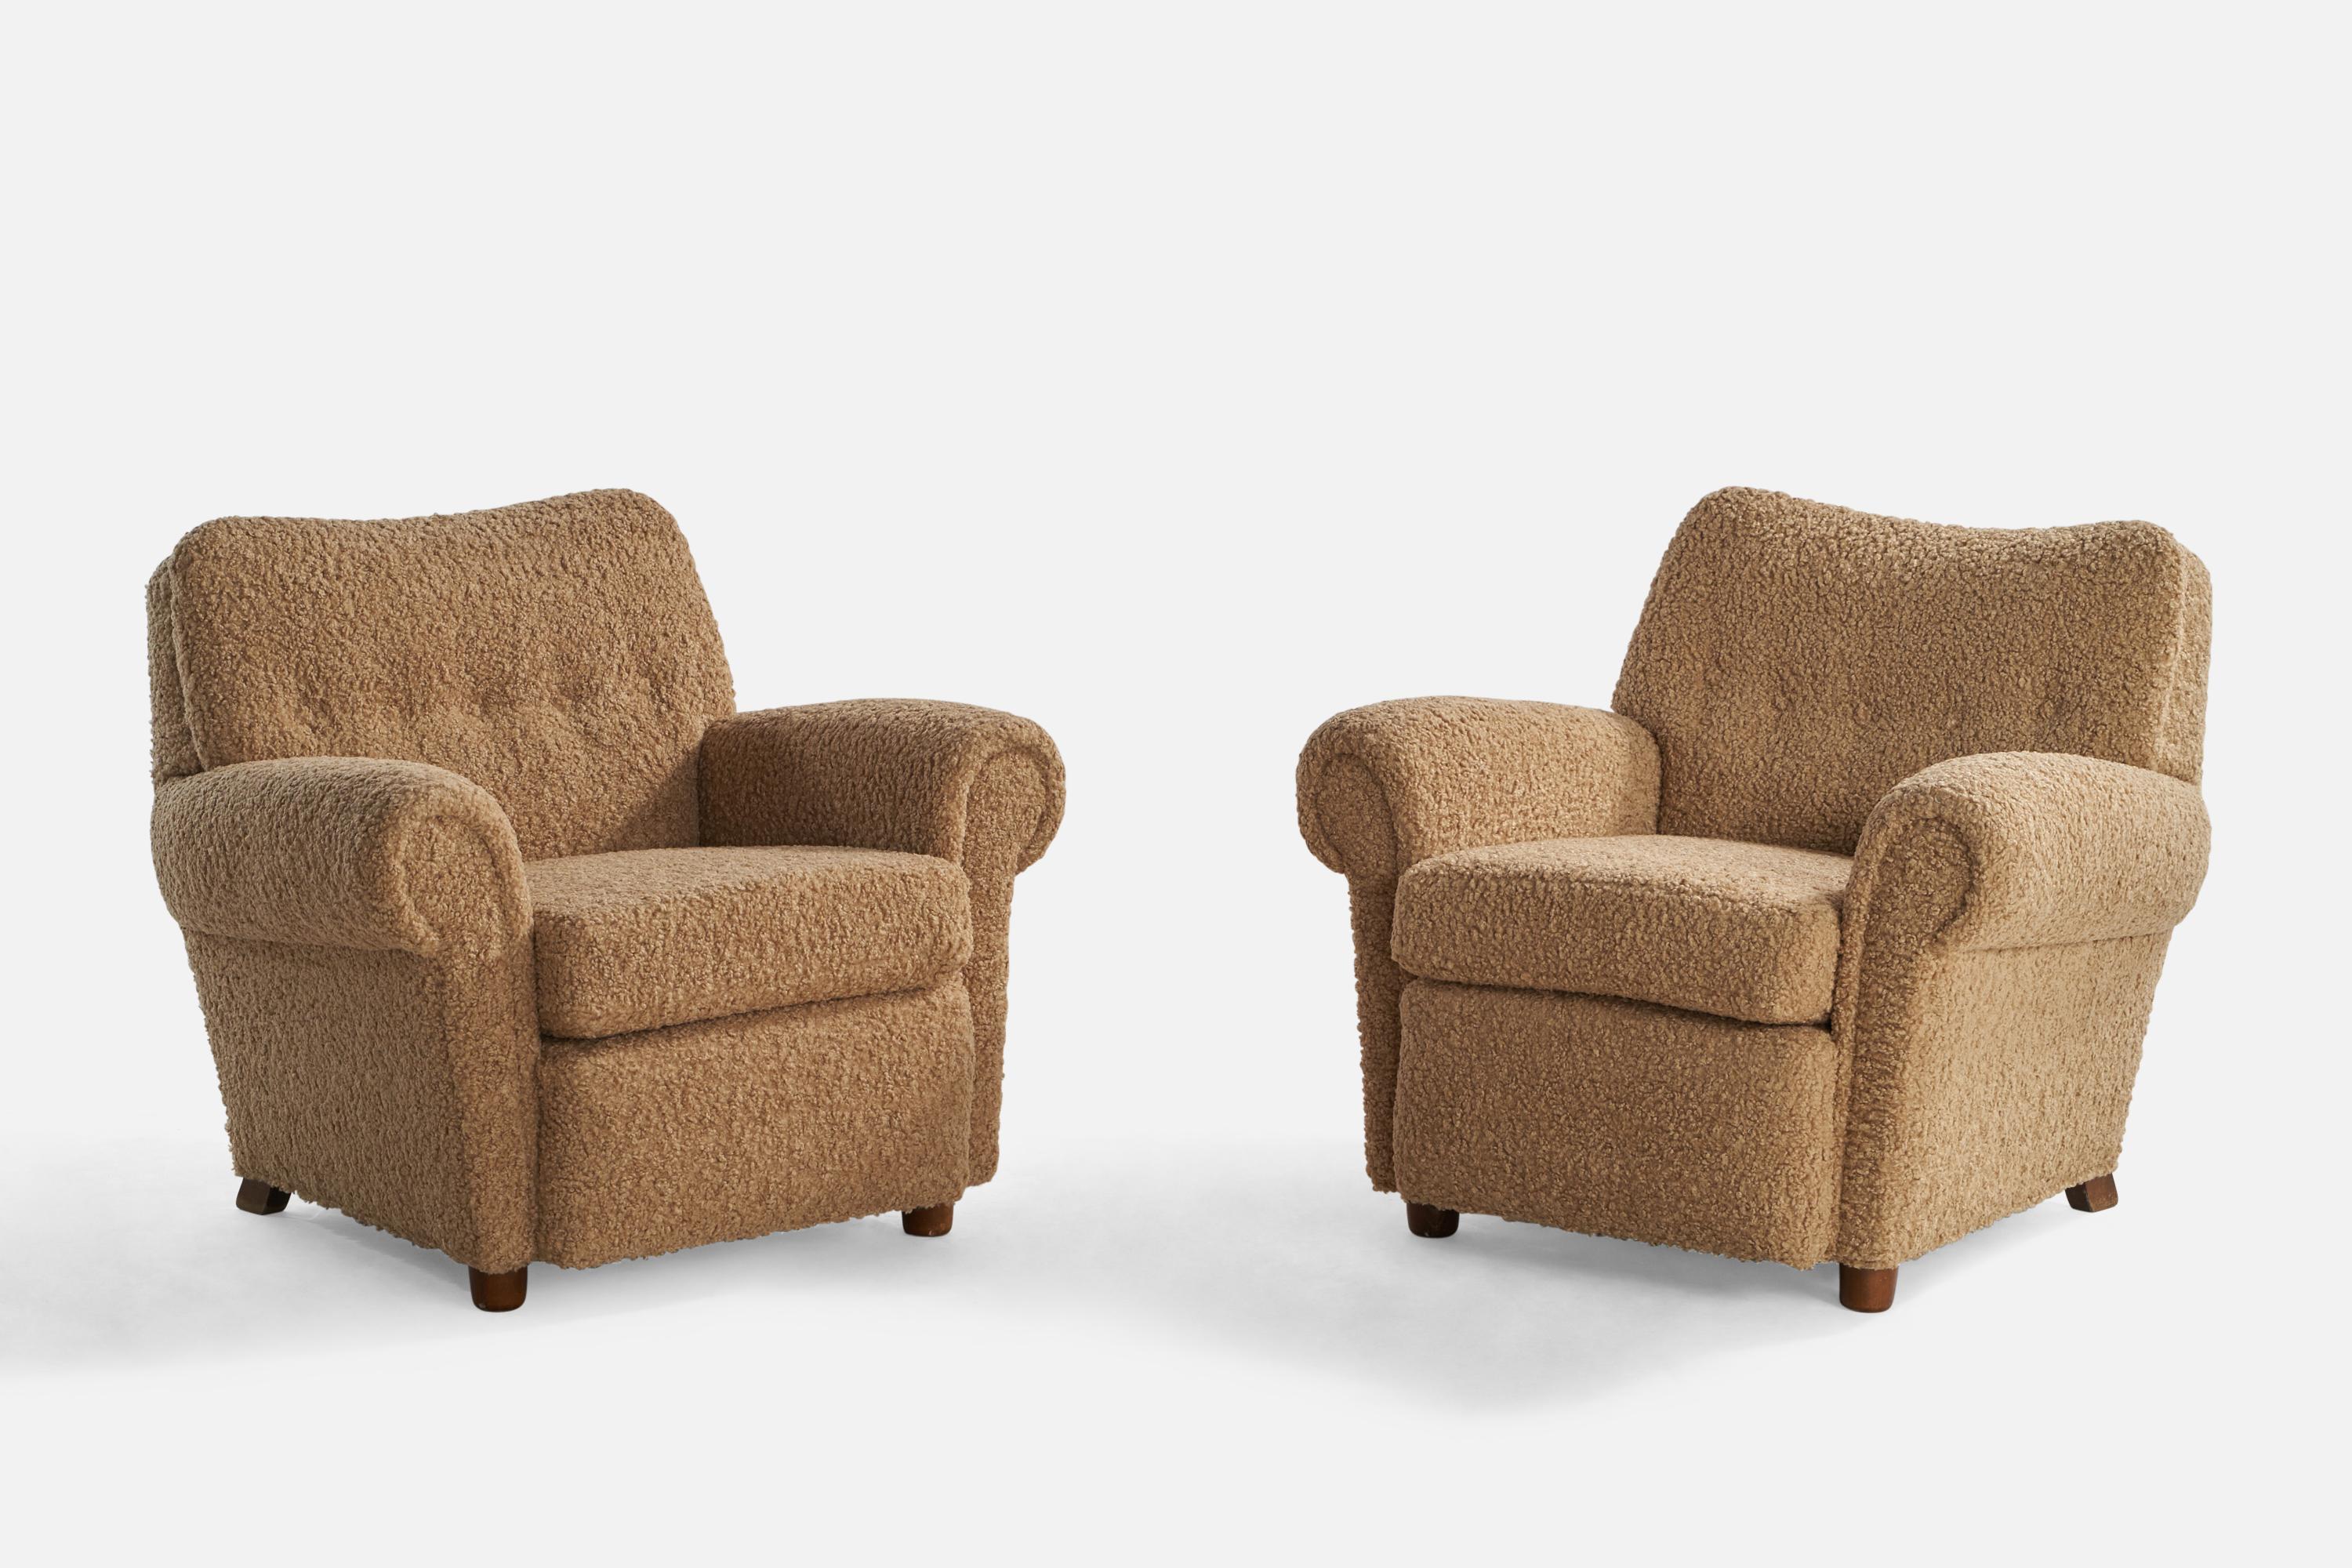 A pair of dark-stained wood and beige brown bouclé fabric lounge chairs designed and produced in Denmark, 1940s.

Seat height: 19